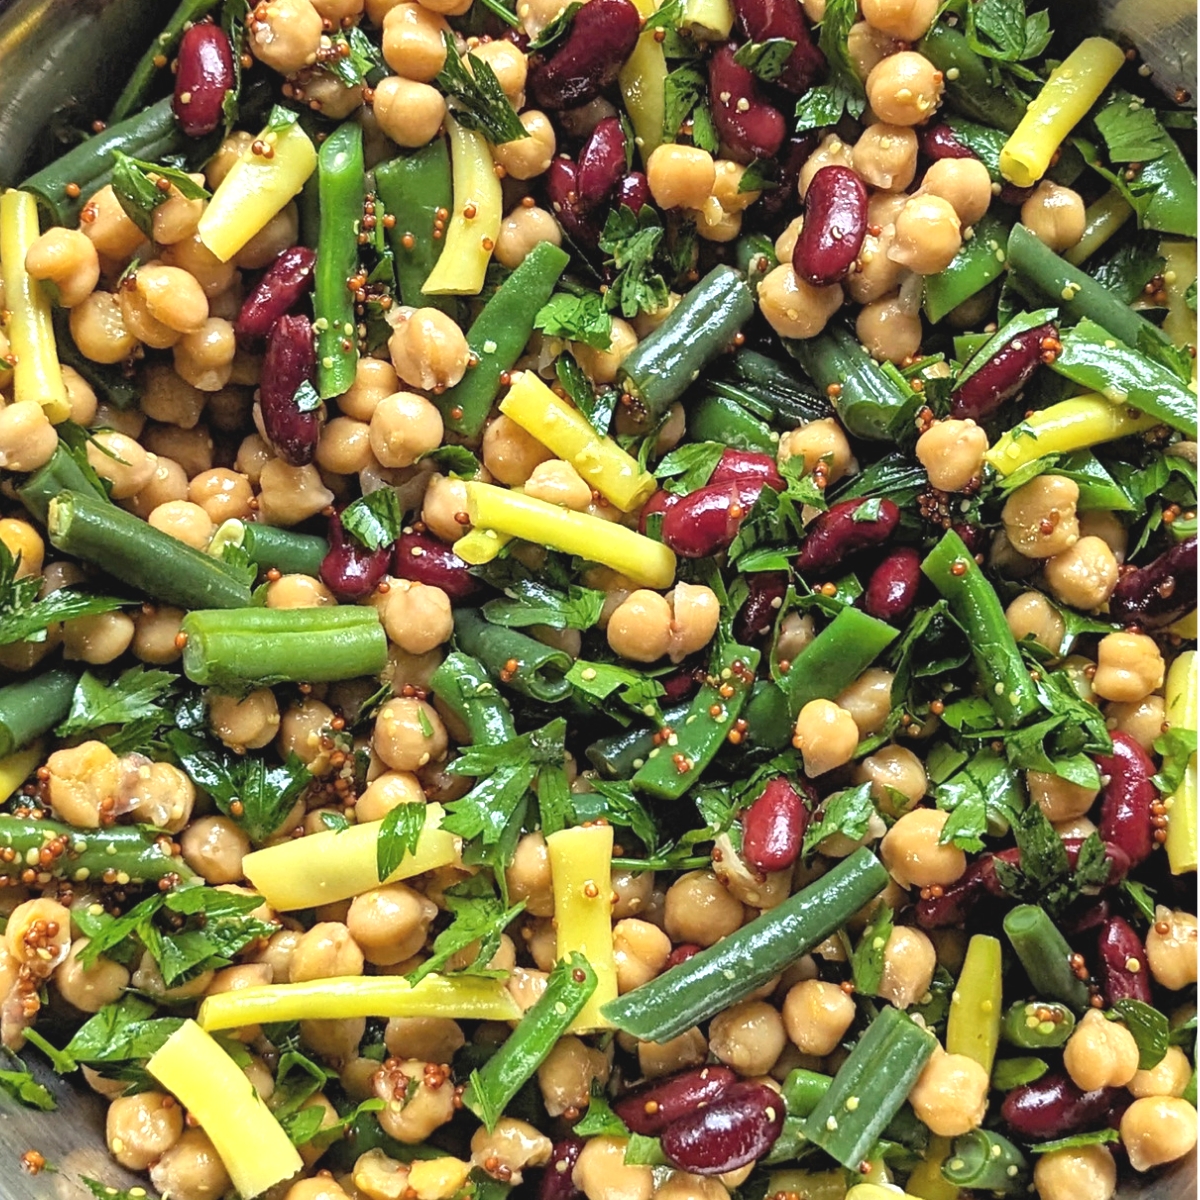 four bean salad recipe with fresh green beans yellow beans and garbanzos and kidneys in a homemade apple cider italian vinaigrette